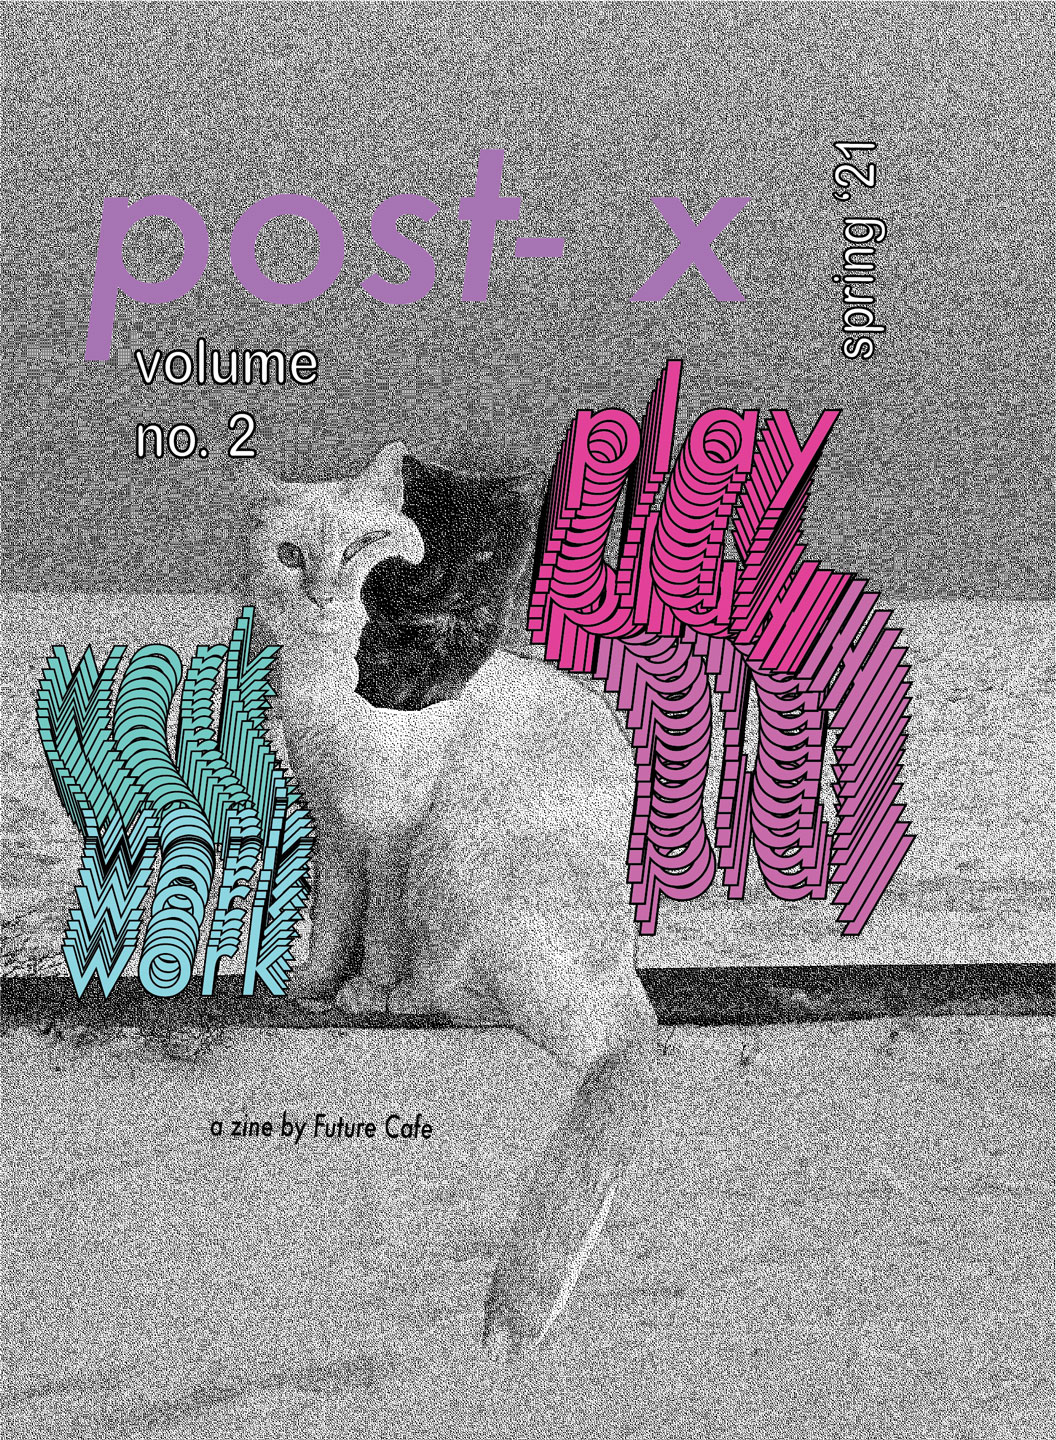 Cover of Future Cafe Post-X Zine issue 2, showing a white cat sitting on a shelf surrounded by stylized text reading 